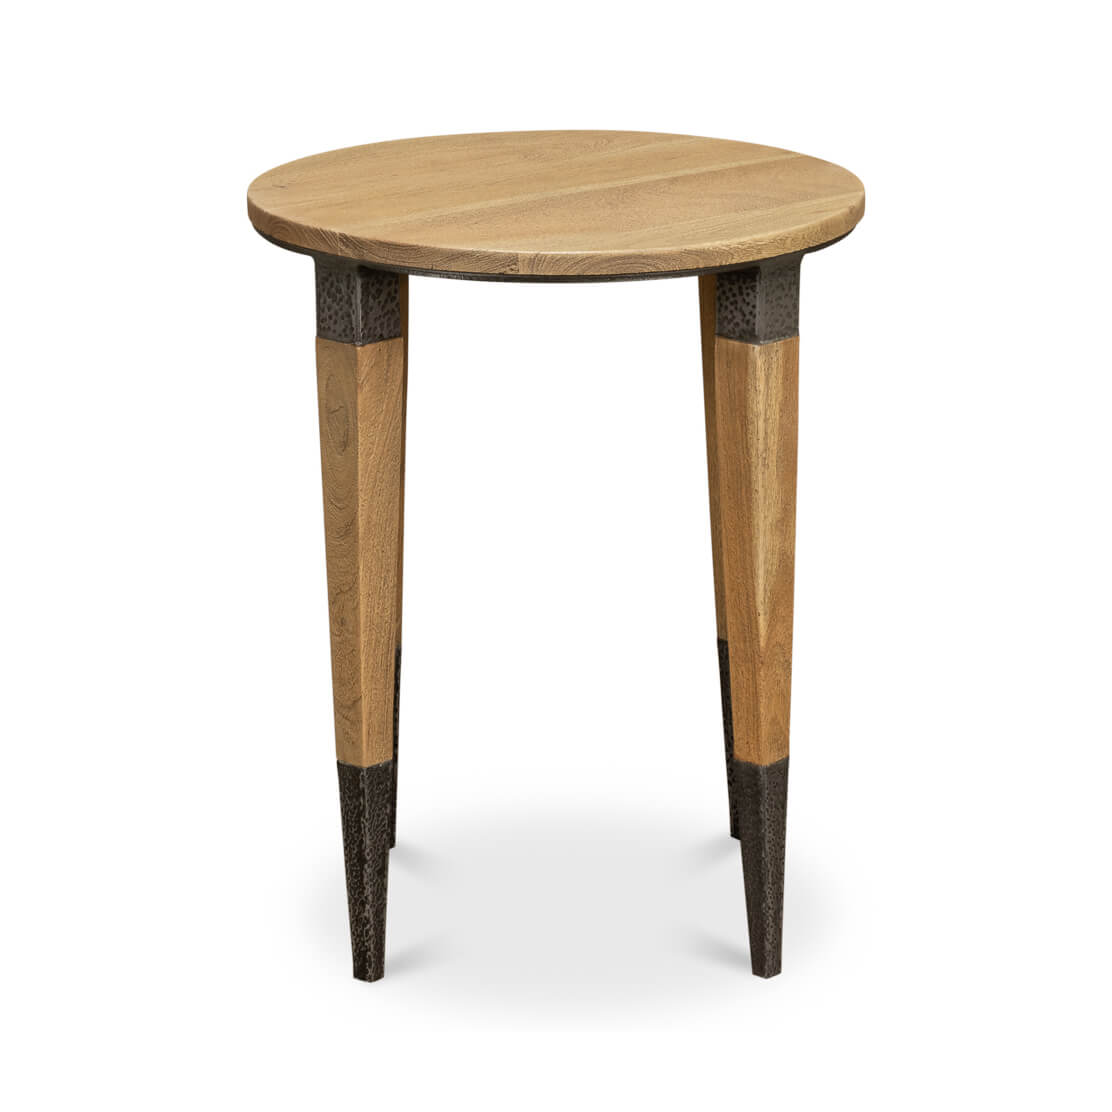 Modern Industrial Round Accent Table - English Georgian America